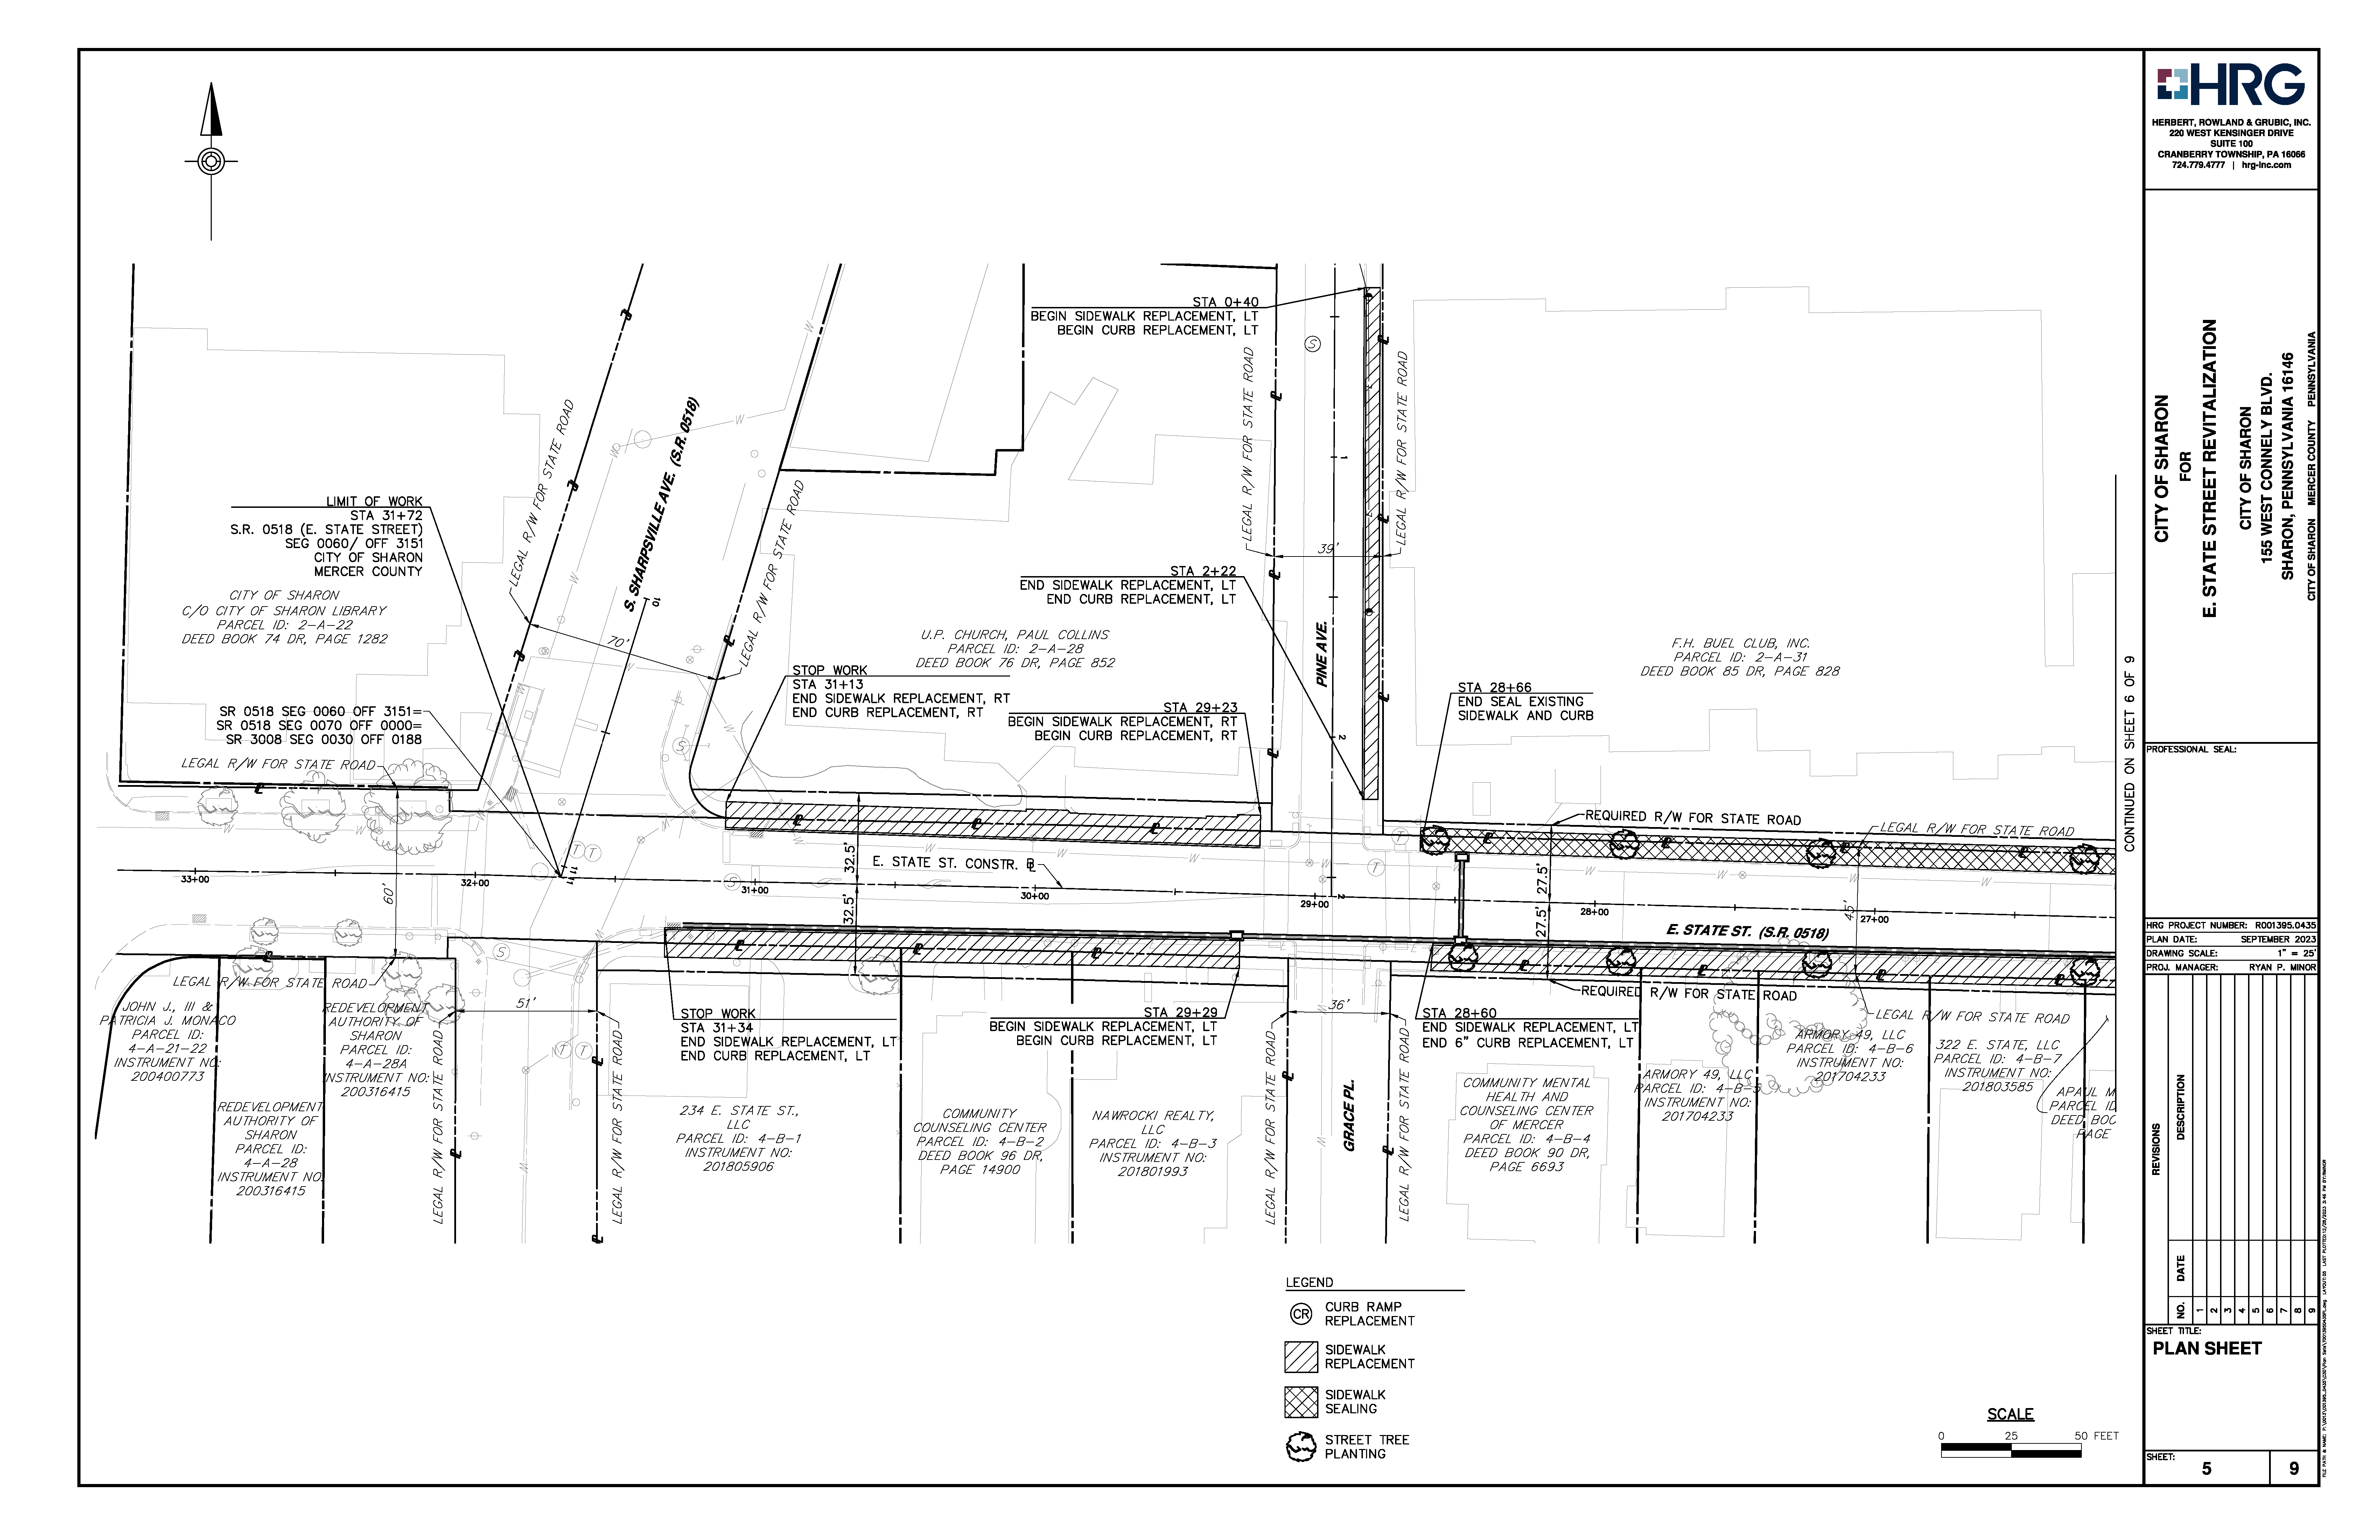 Click on the picture for a PDF version of the project plans.